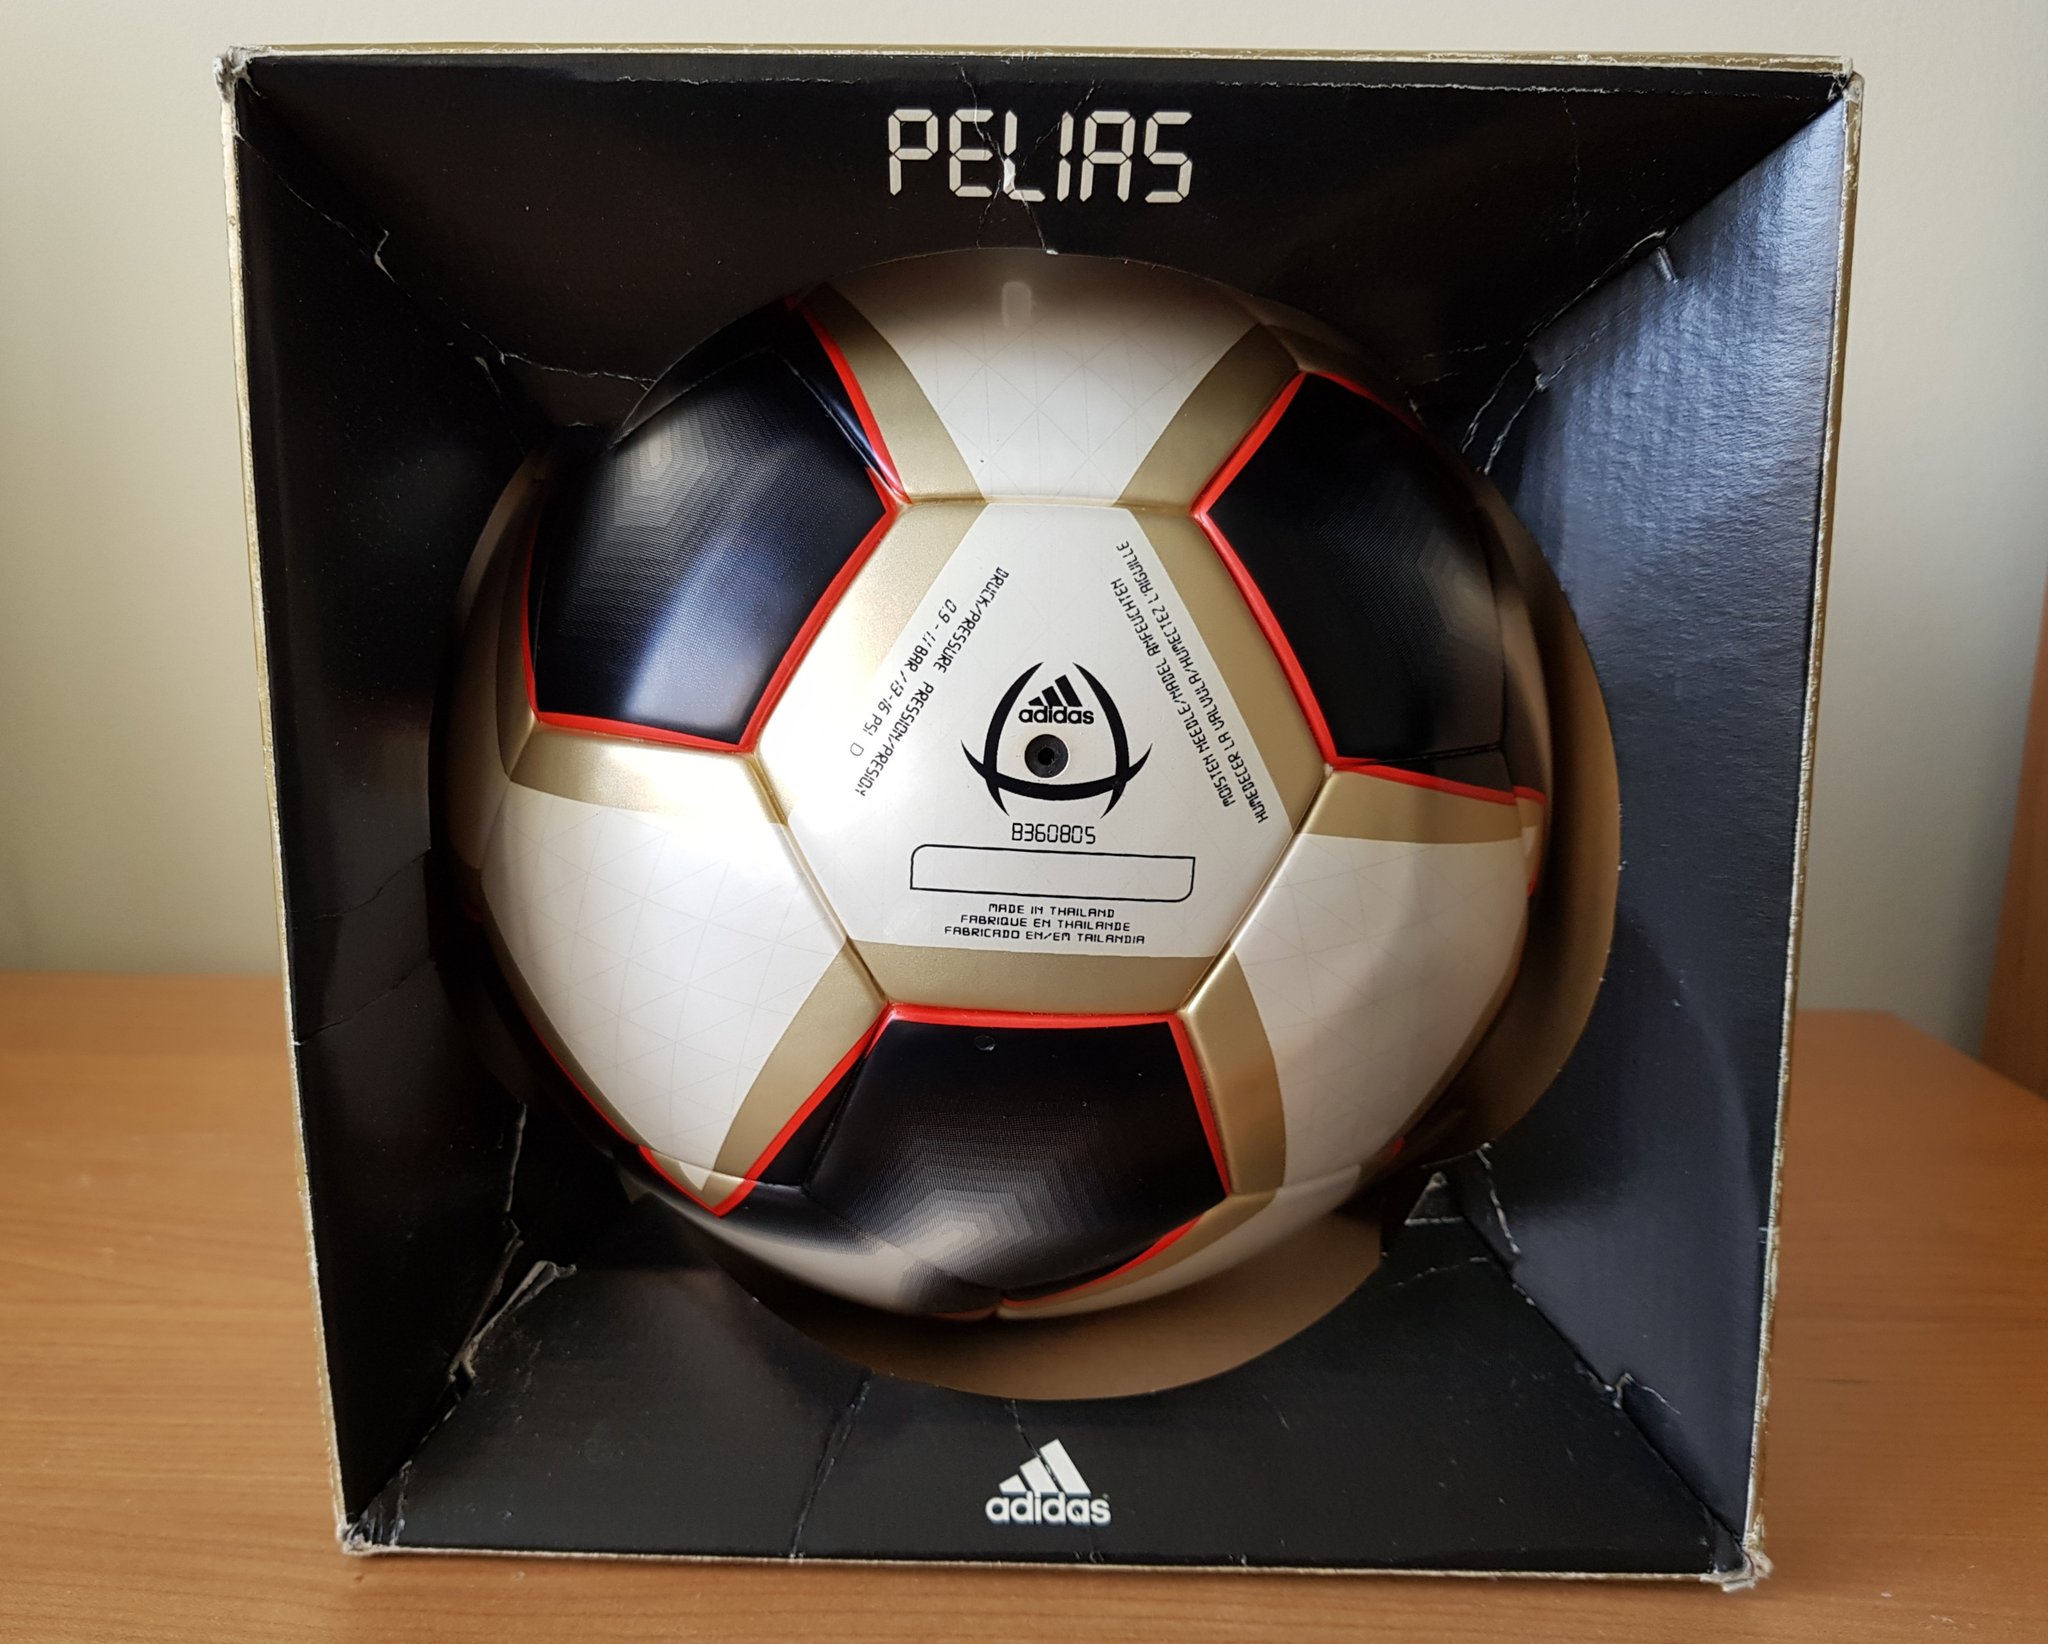 Rob Filby on Twitter: "Adidas Pelias - Confederations Cup 2005 Official Match Ball and original #adidaspelias #pelias2 #confedcup #confedcup2005 #omb #fifa #officialmatchball https://t.co/eO9JQNf4Rx" / Twitter